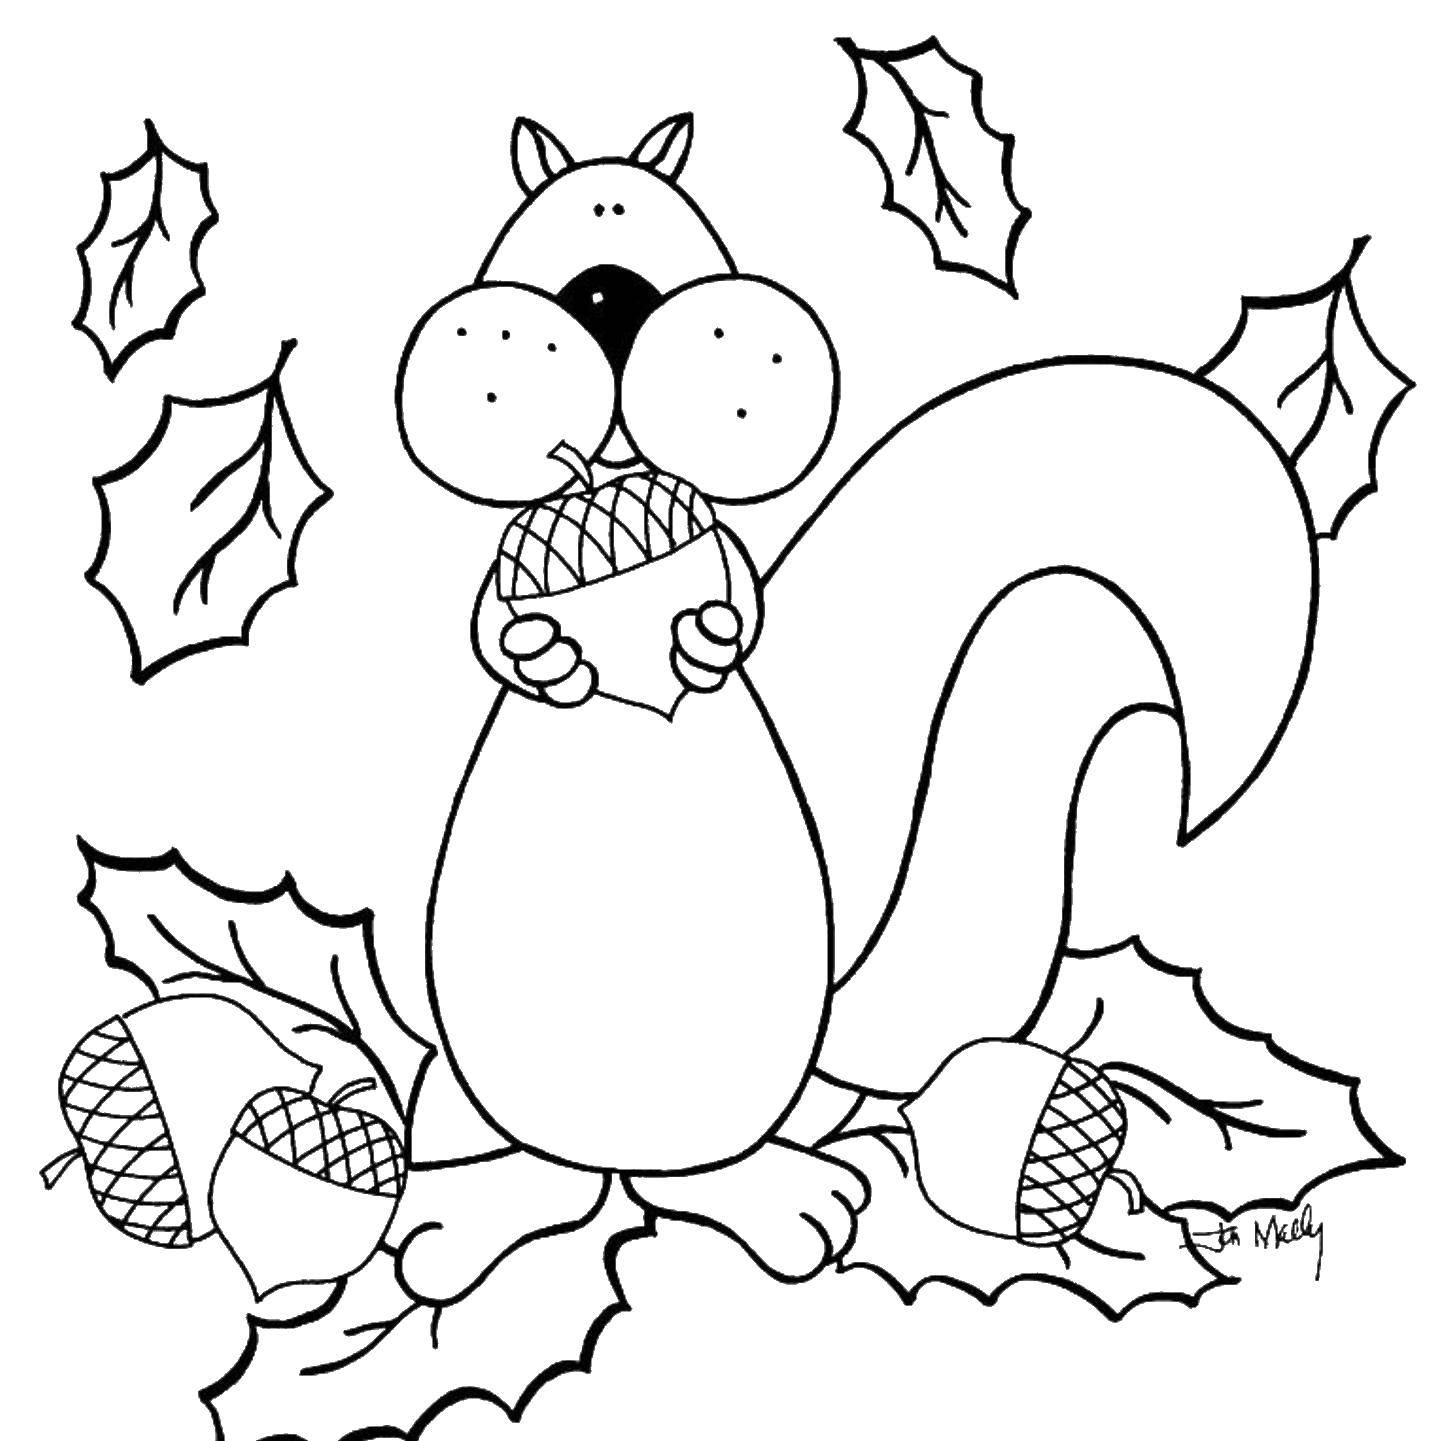 Coloring Chubby squirrel. Category Autumn. Tags:  Autumn, leaves.